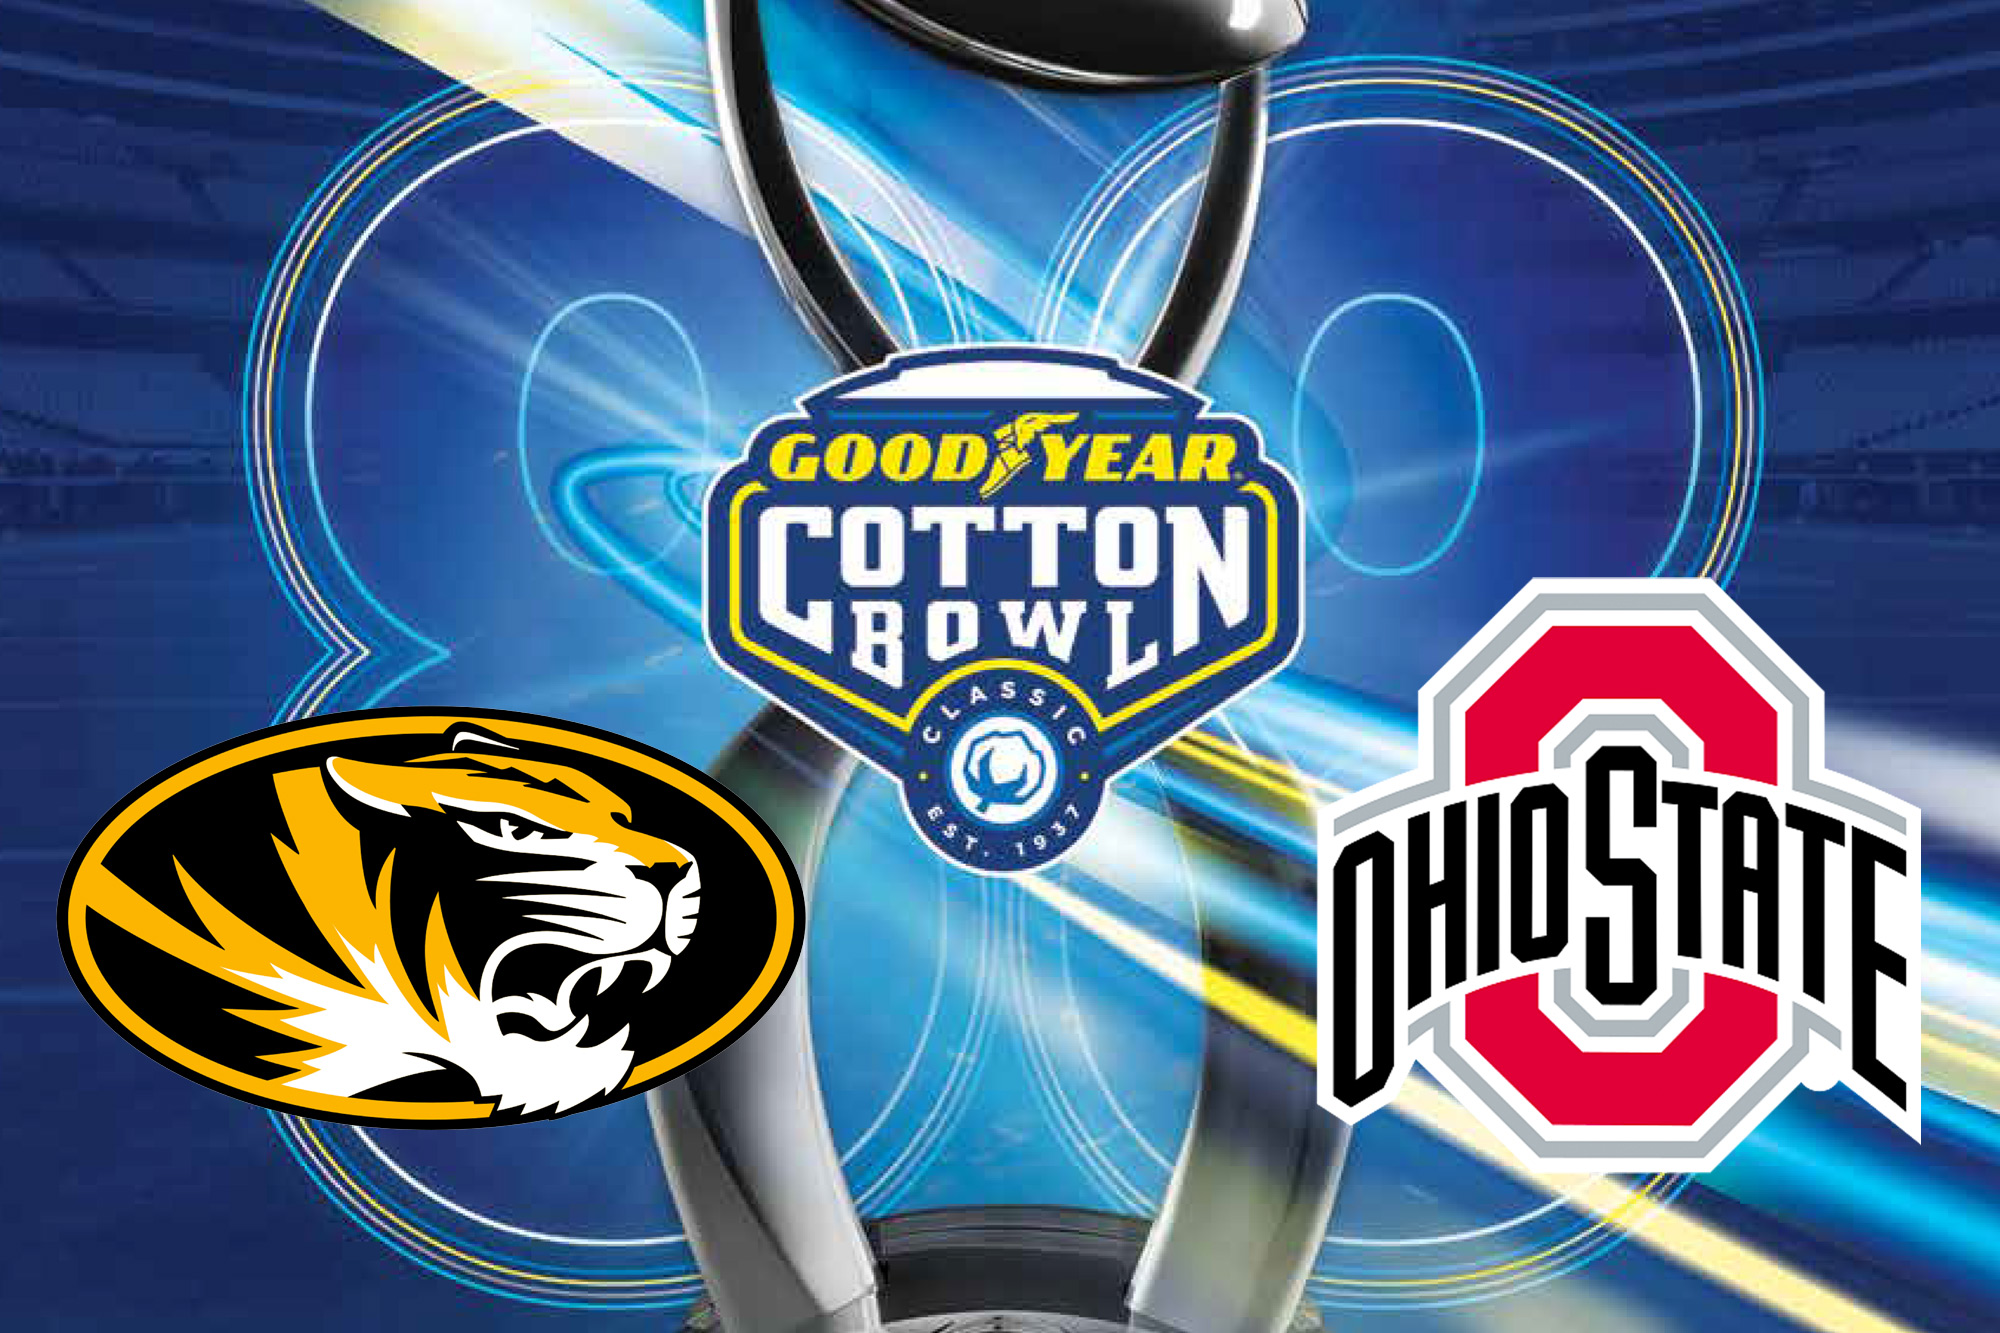 How to see and celebrate the Cotton Bowl // Show Me Mizzou